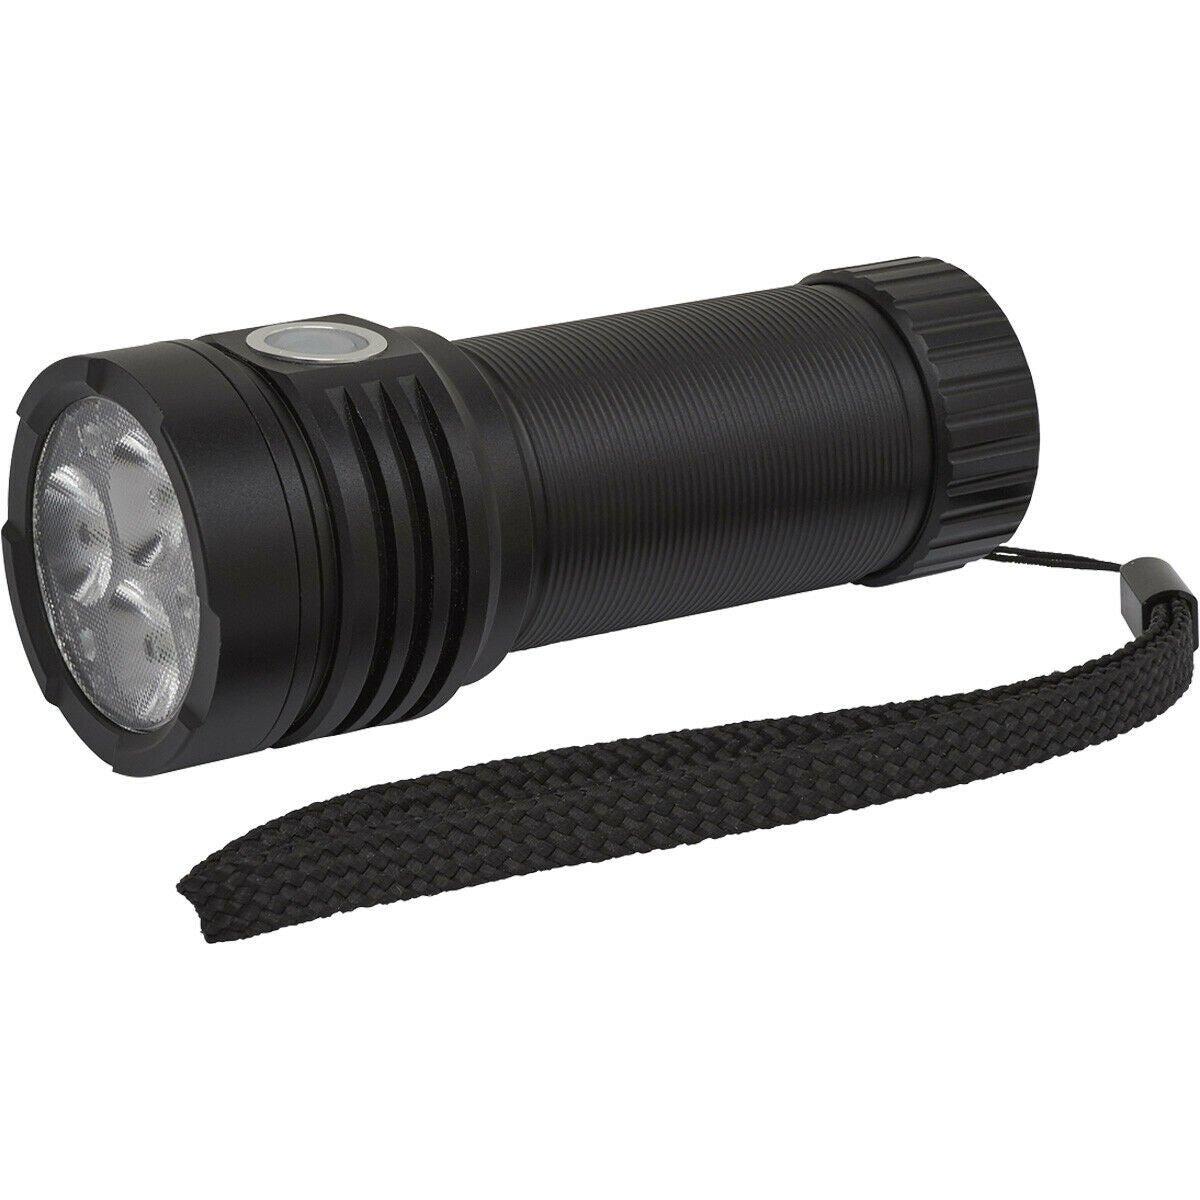 ULTRA BRIGHT 3500lm Rechargeable LED Torch - OSRAM P9 30W - 250m Light Range